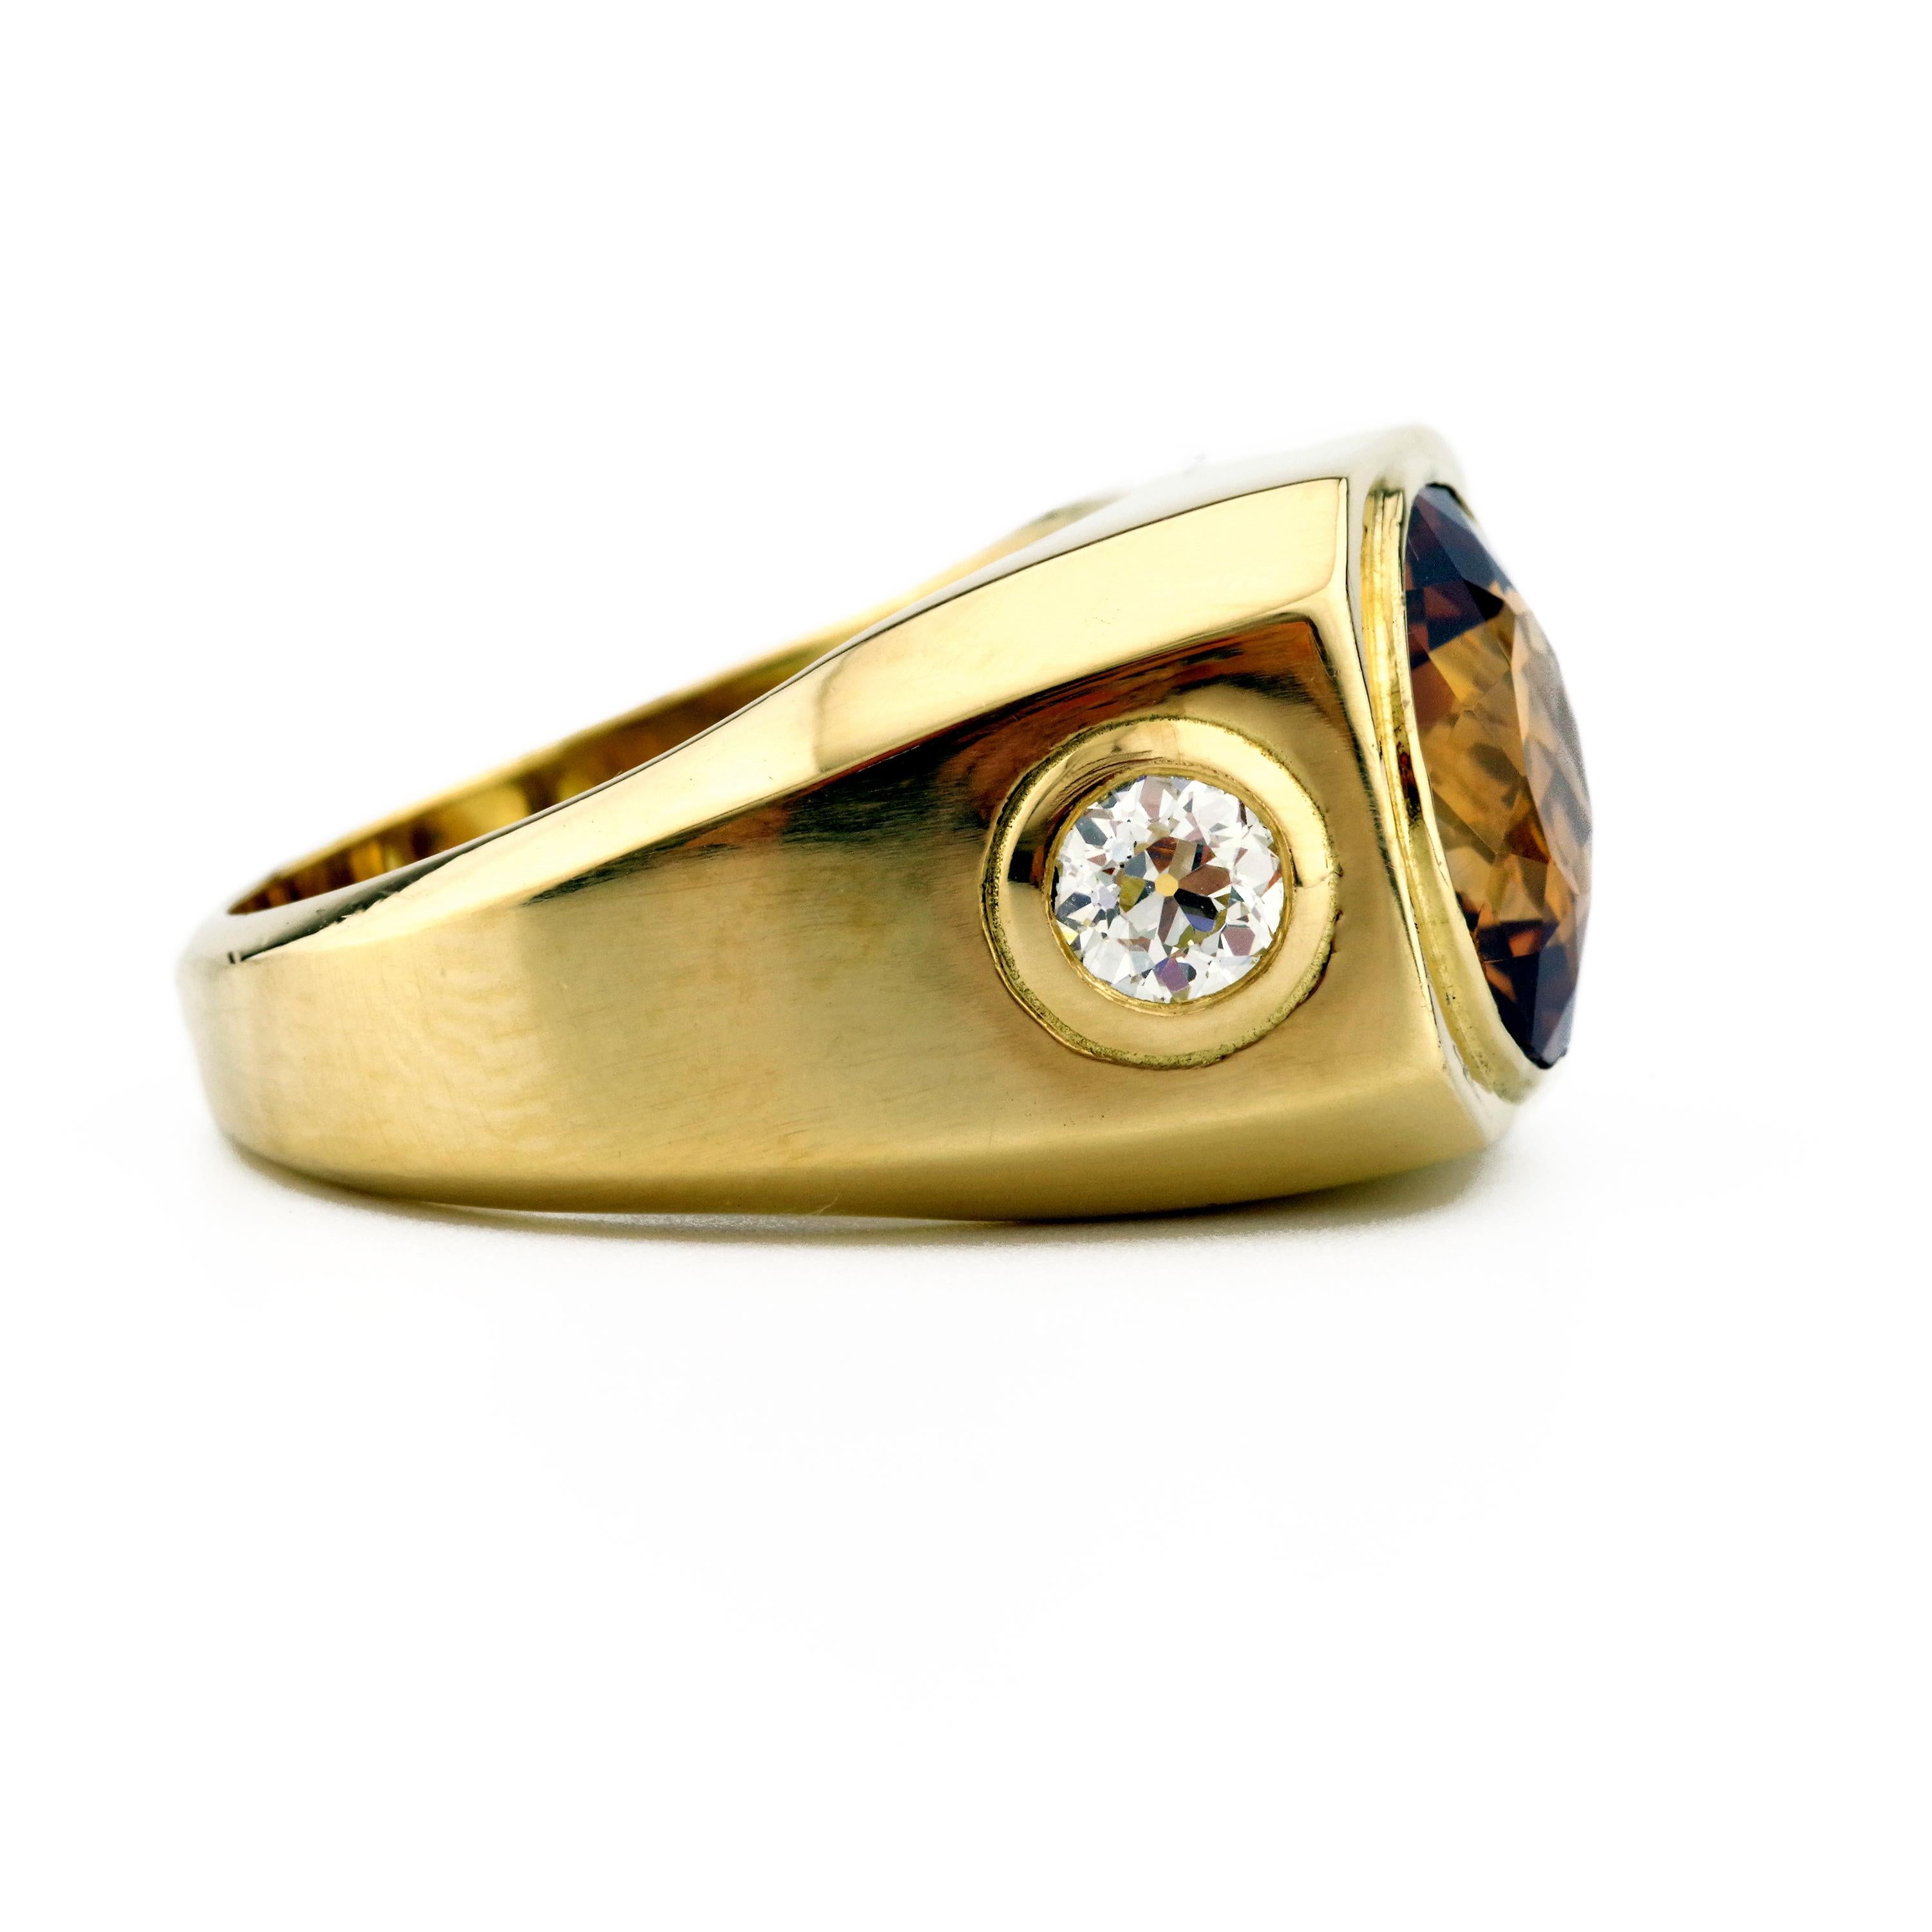 Contemporary Men's Precious Topaz Ring in Whiskey is Ruggedly Handsome